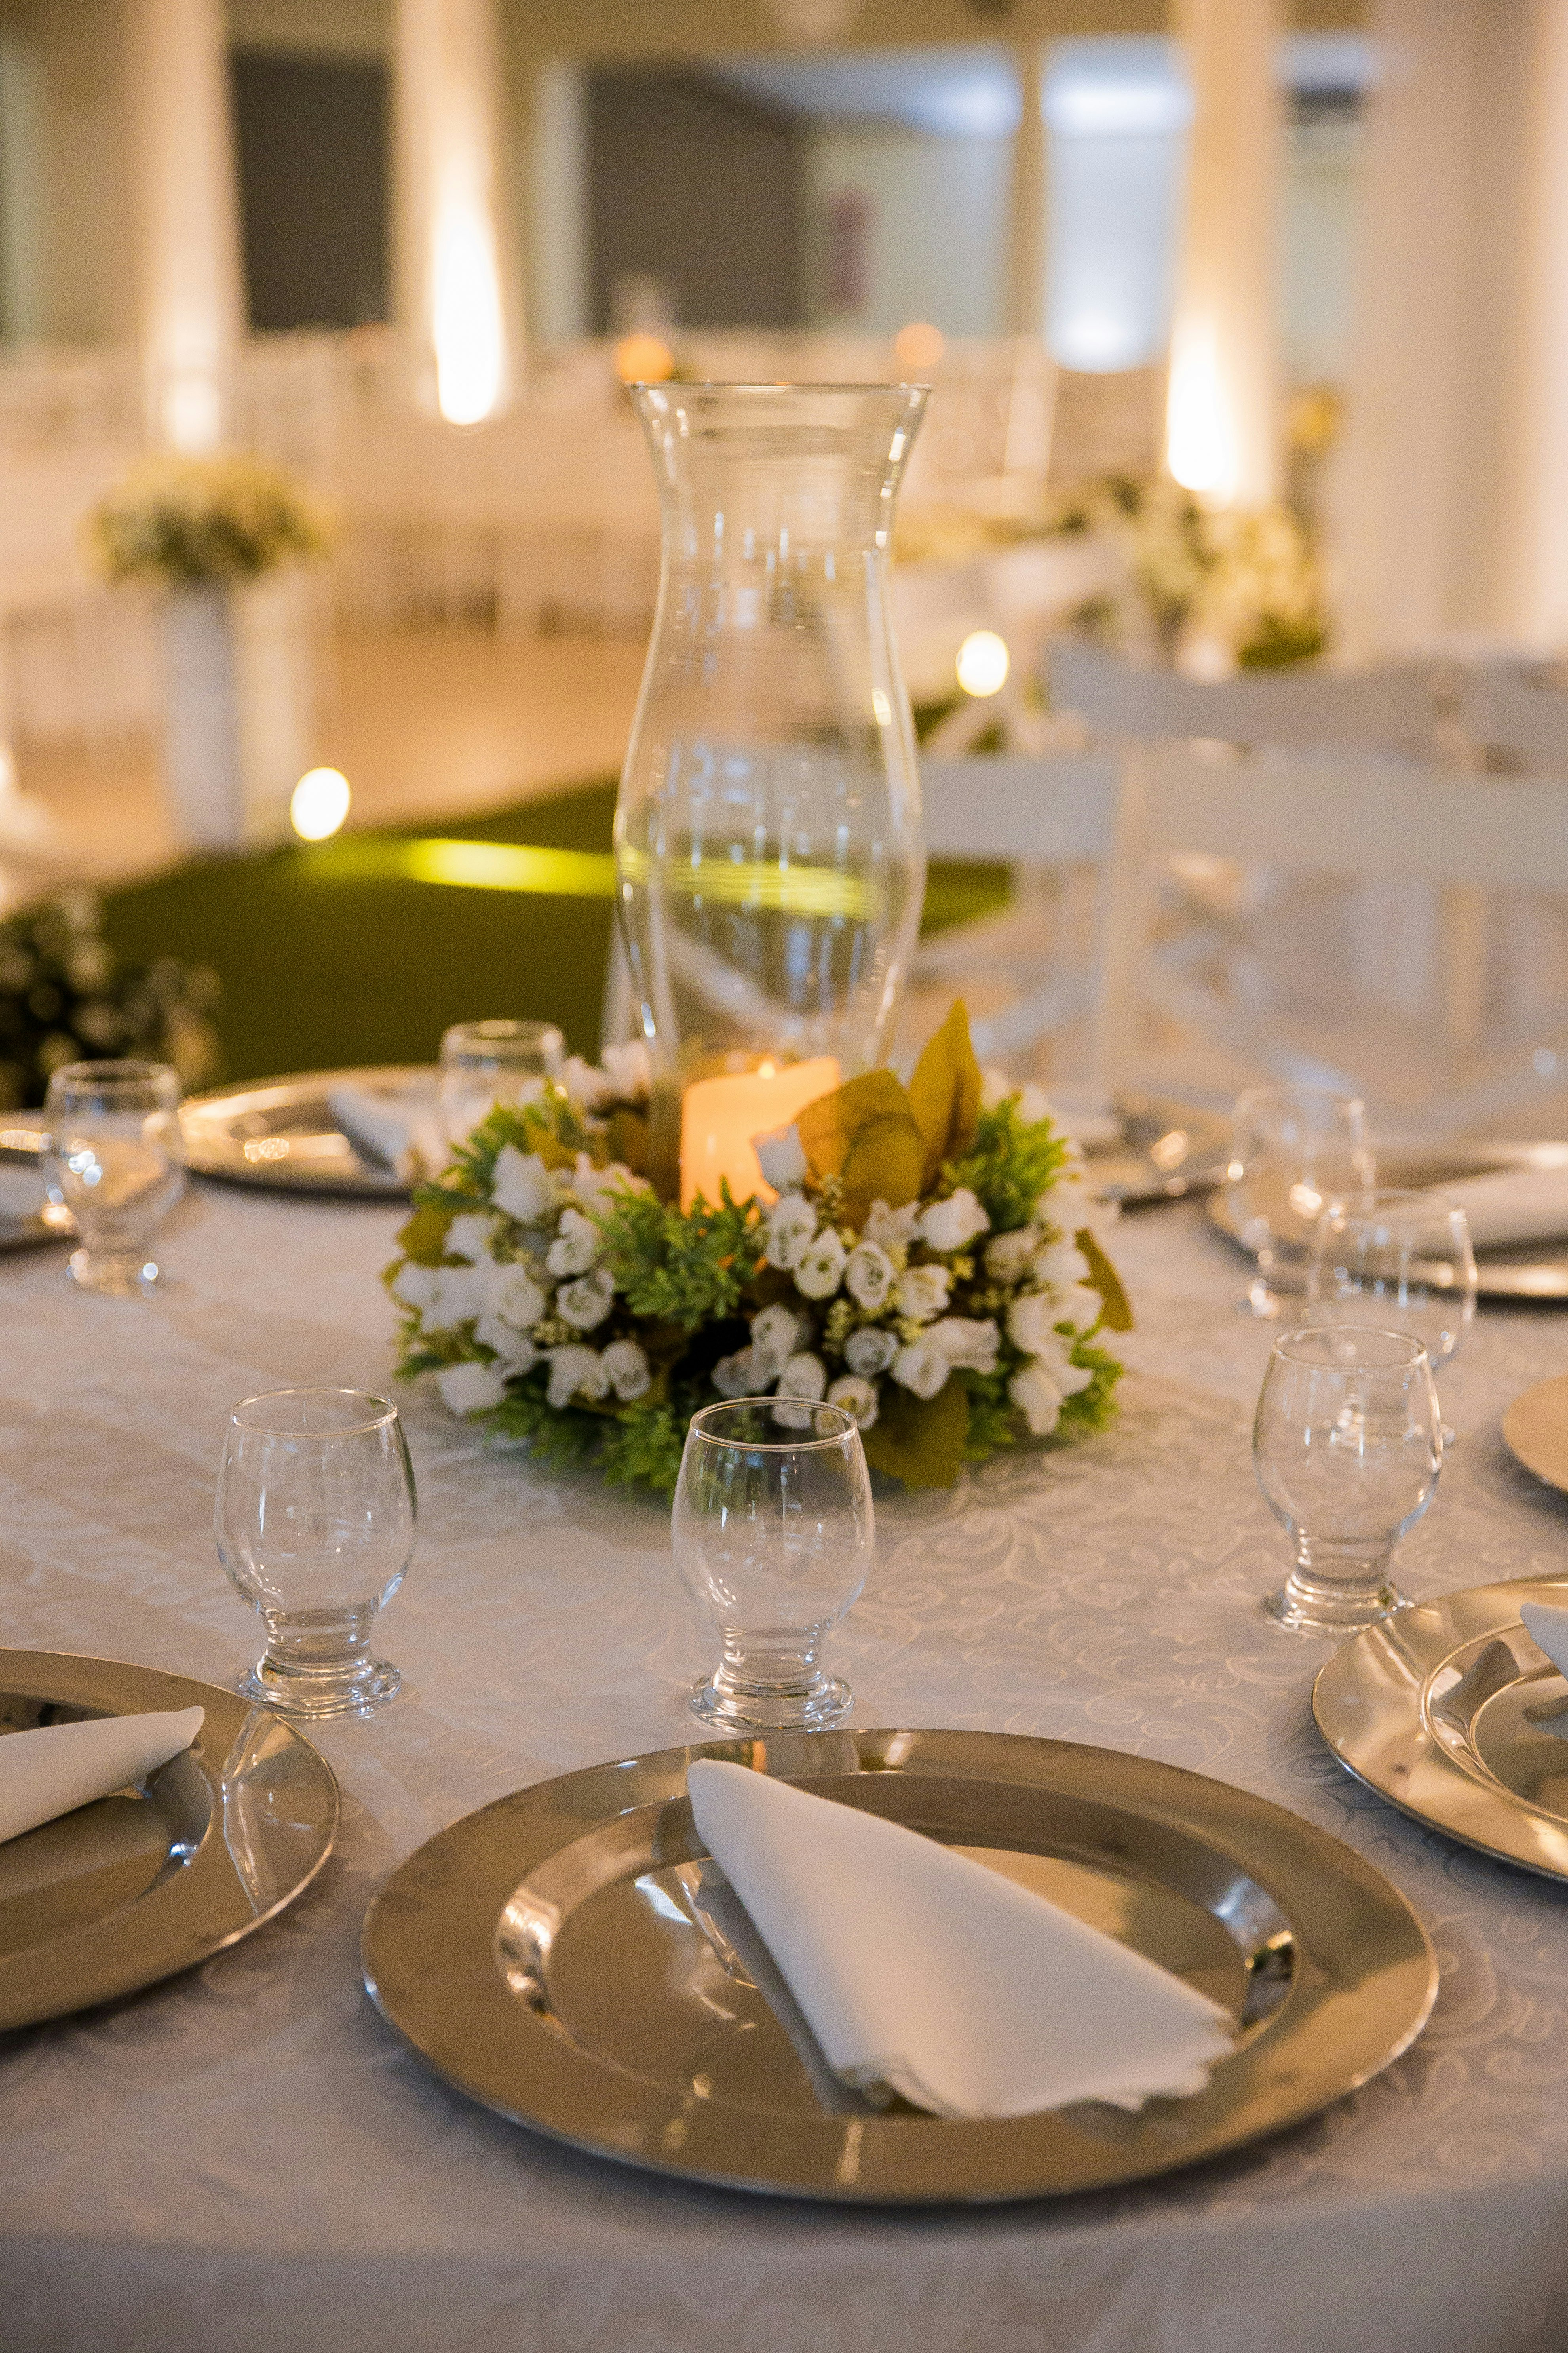 white flowers in clear glass vase on table